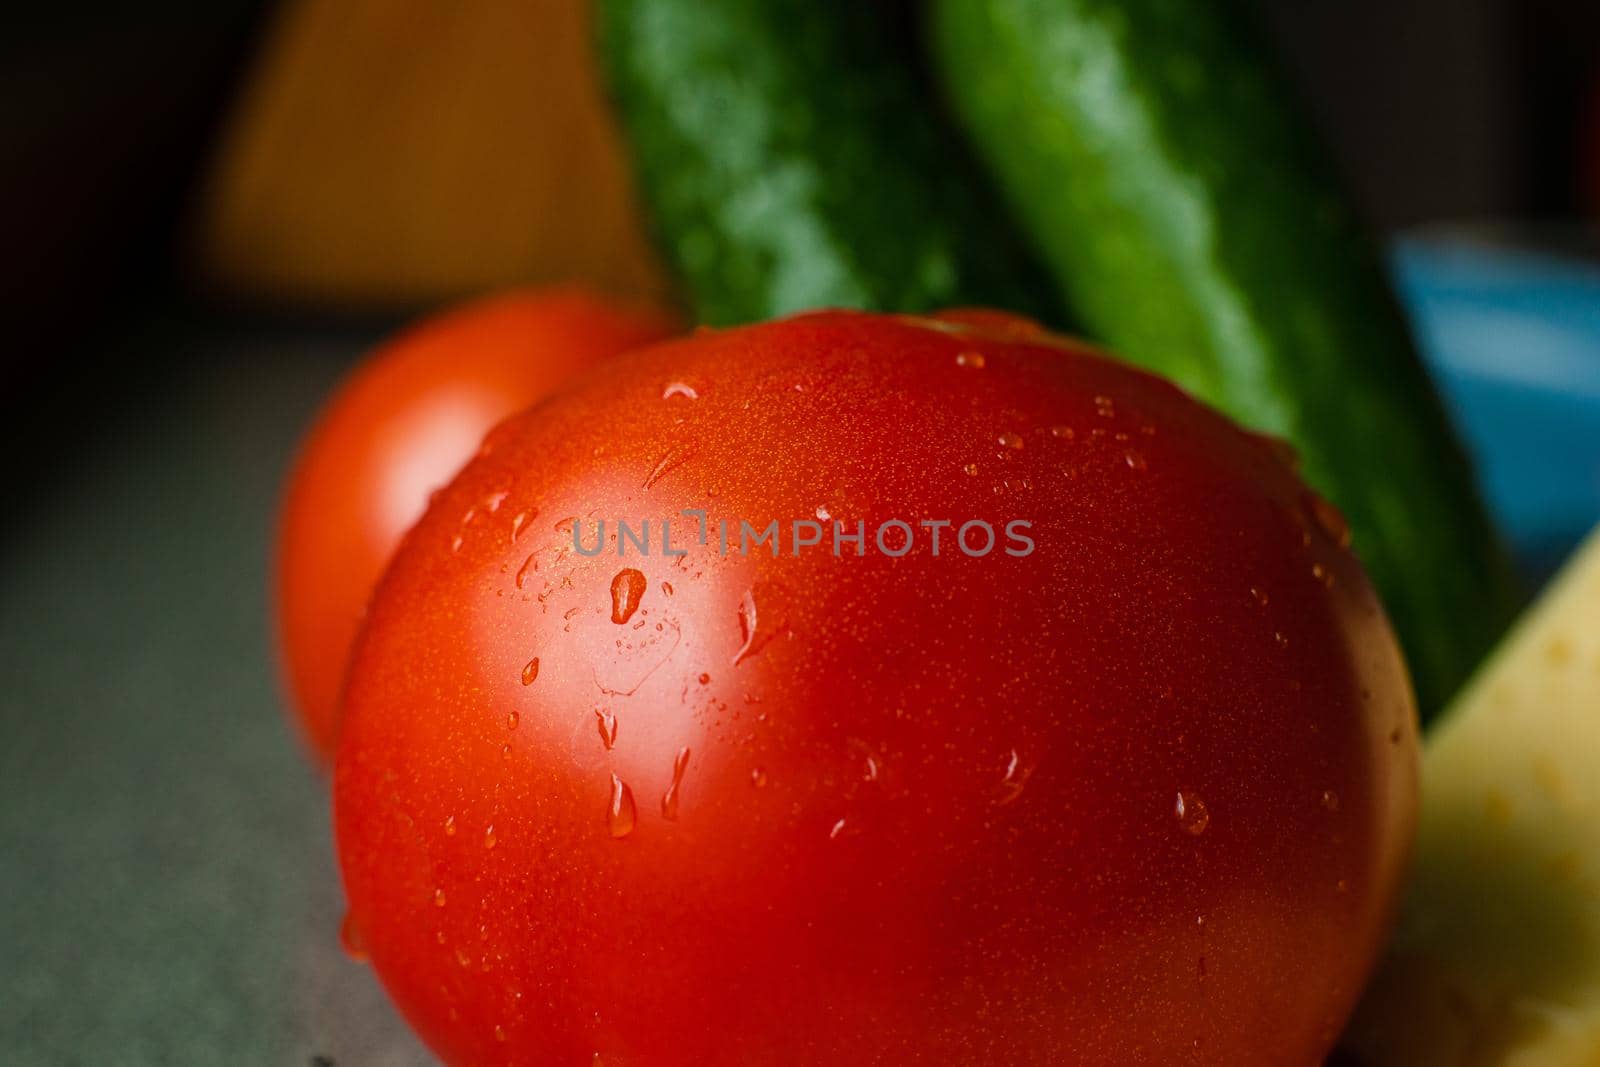 Picture with focus on washed red tomato lies on the table with drops of water on it